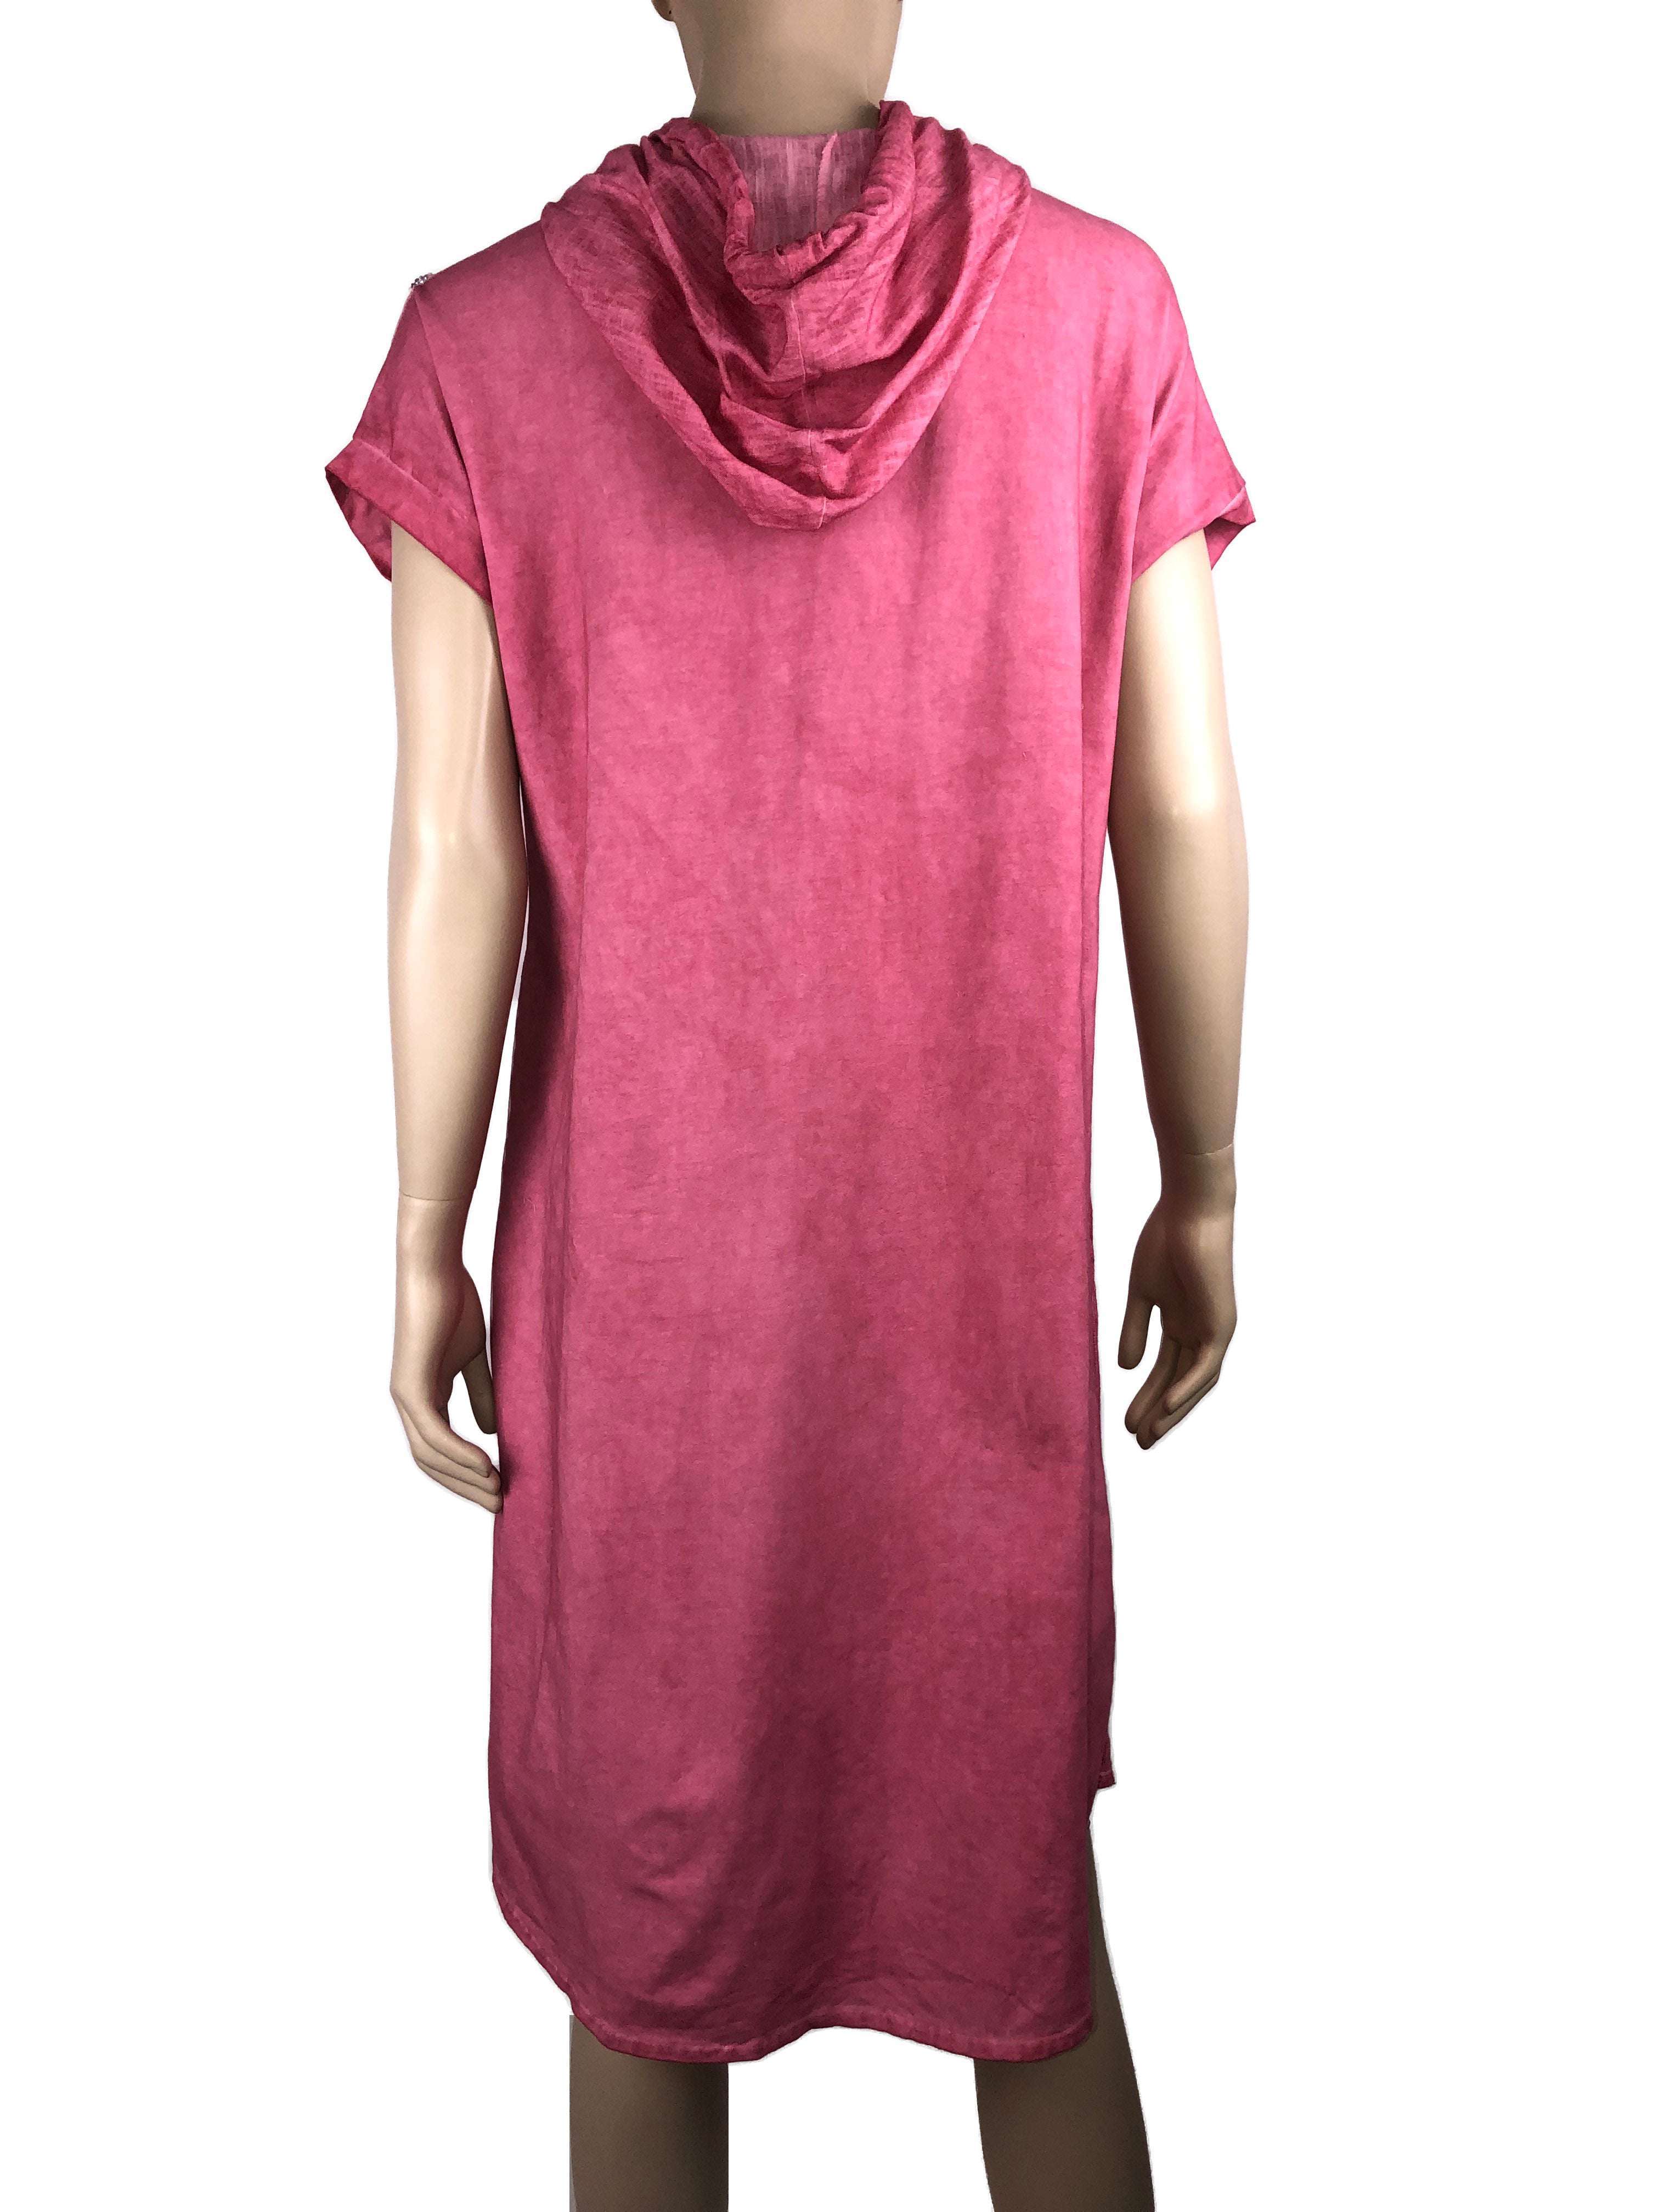 Dresses For Cruise Stunning Pink Comfort Dress Quality Breathable Stretch Knit Linen Look Now 70% Off Yvonne Marie Boutiques Canada - Yvonne Marie